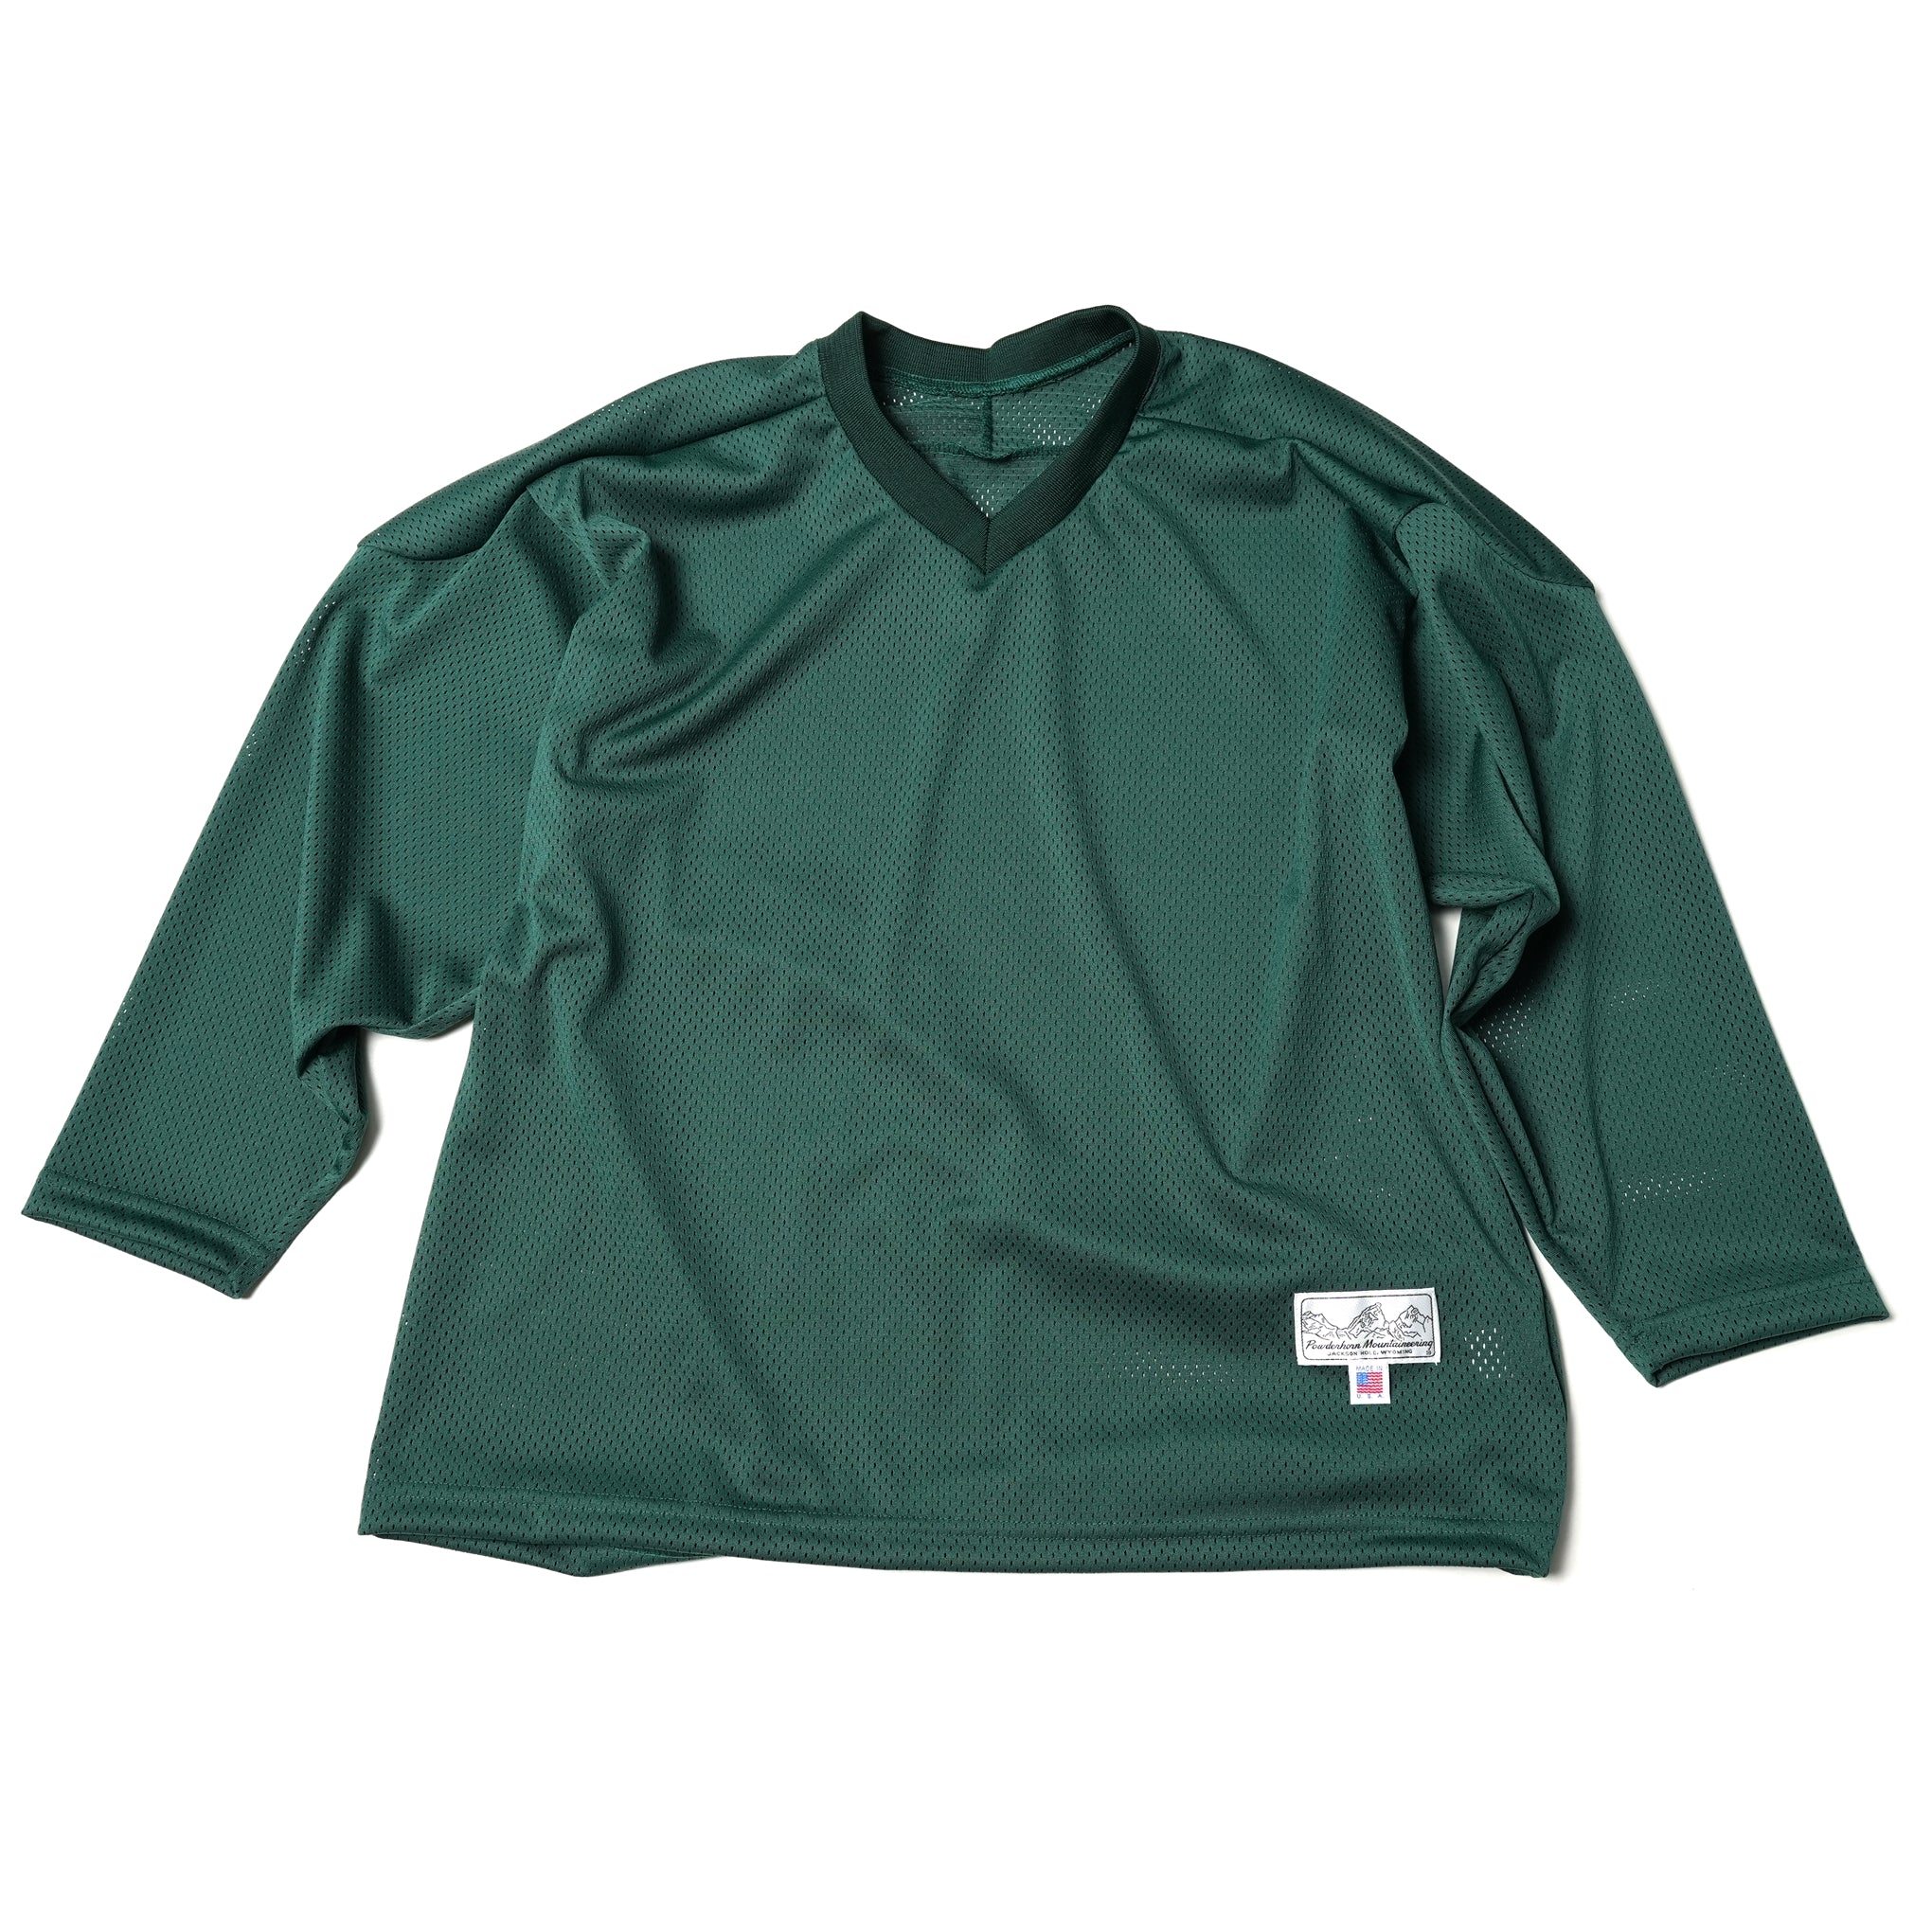 No:PH23FW-003 | Name:P.H. M. MESH TEE | Color:Green/Blue【POWDERHORN MOUNTAINEERING_パウダーホーンマウンテニアリング】